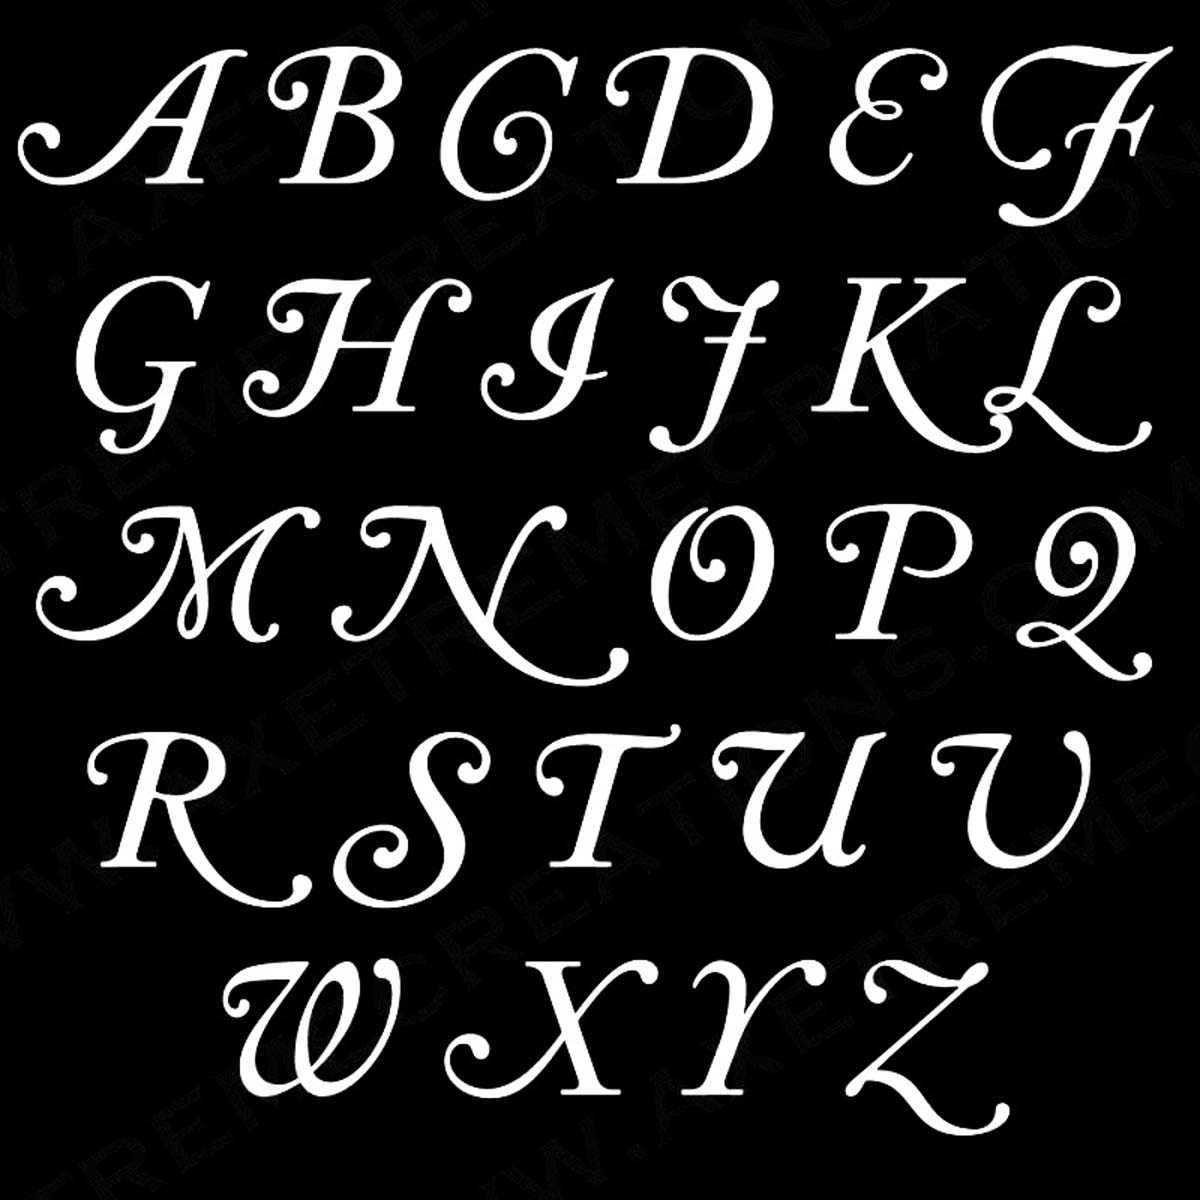 Font style